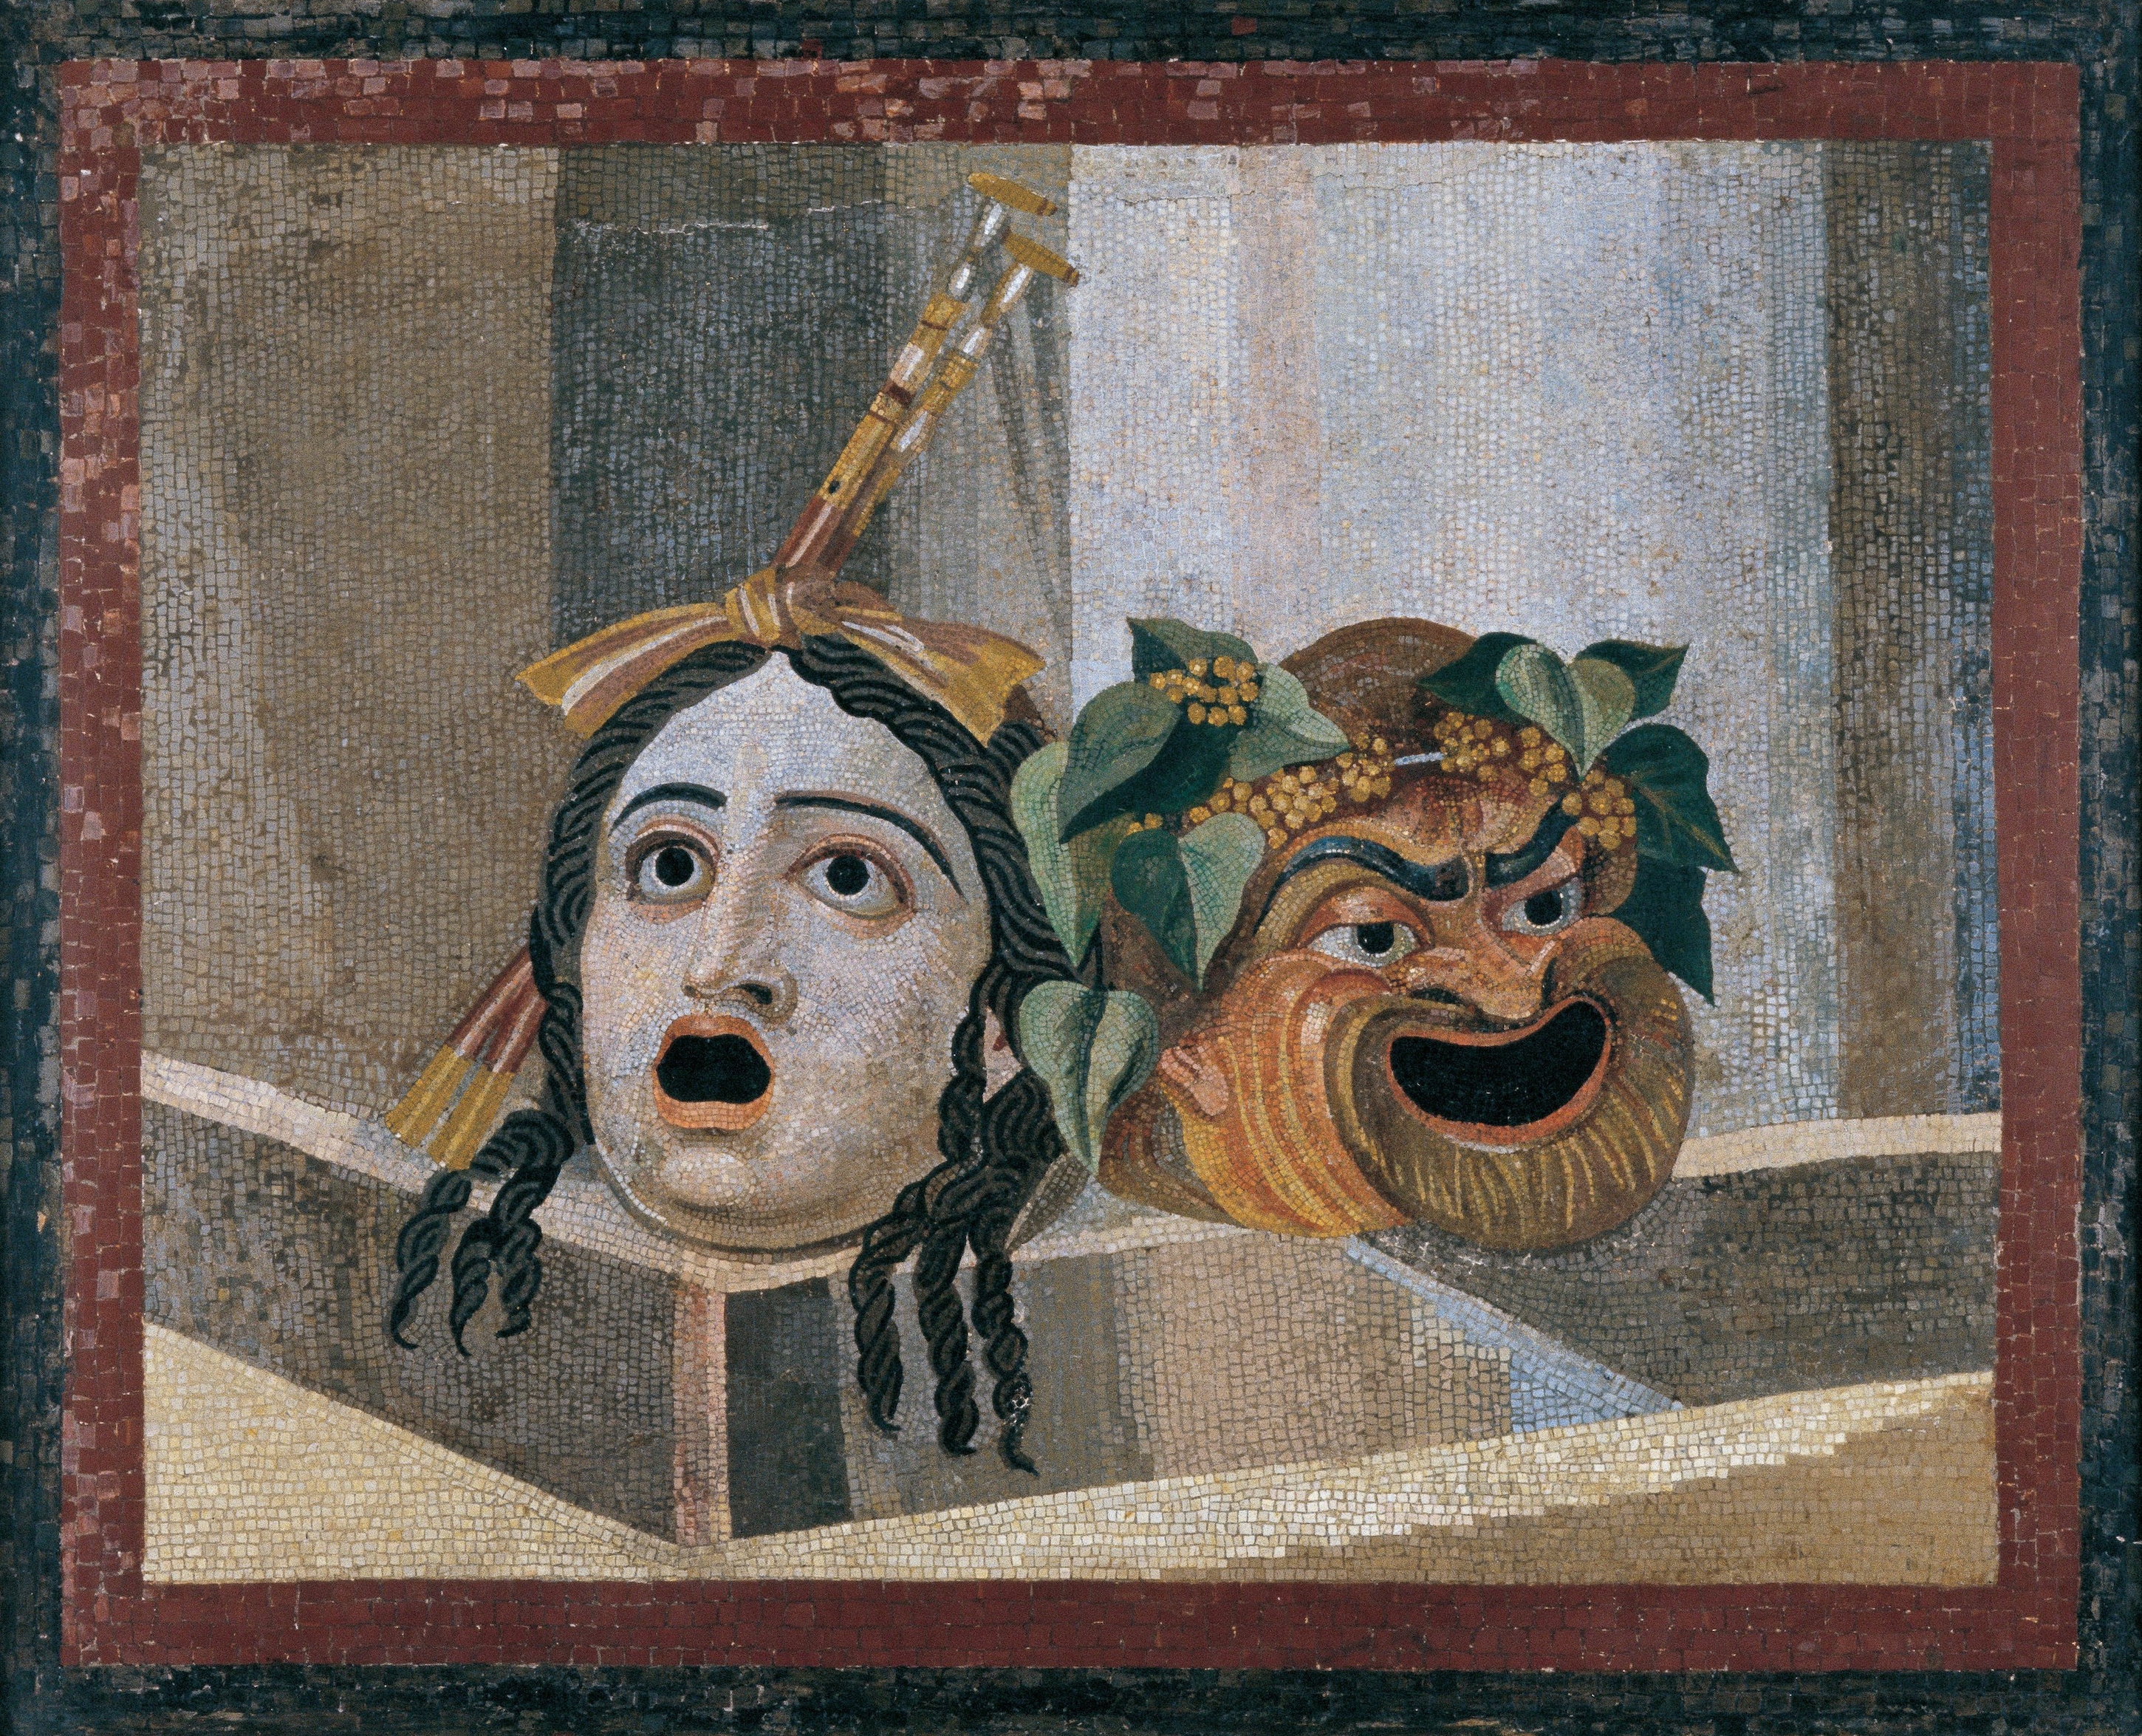 Mosaic of the theatrical masks by Unknown Artist - 100/200 Musei Capitolini